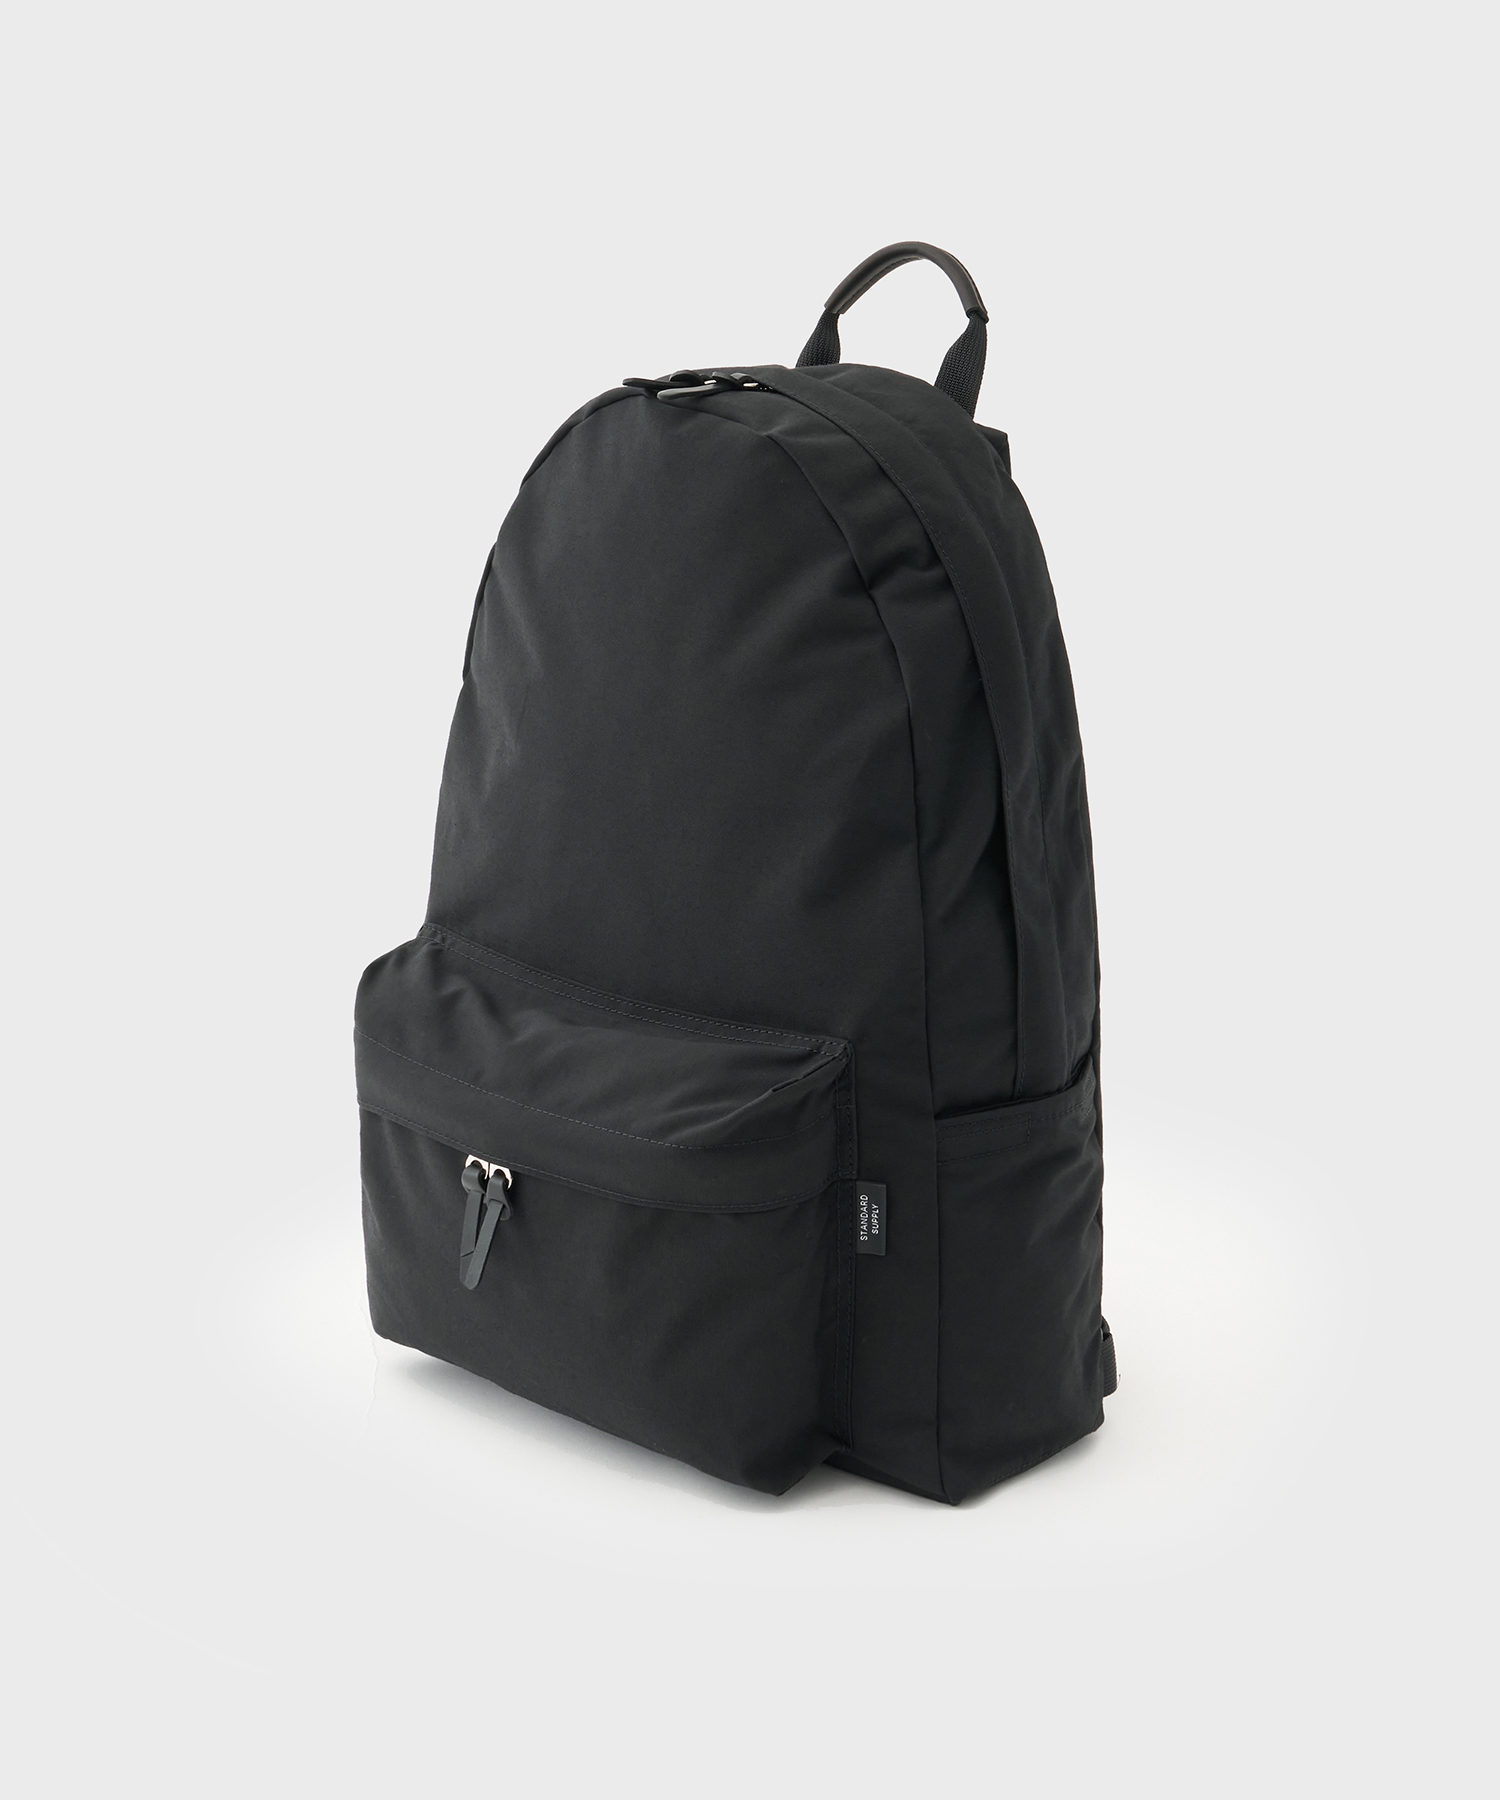 Simplictity Daily Daypack (Black)